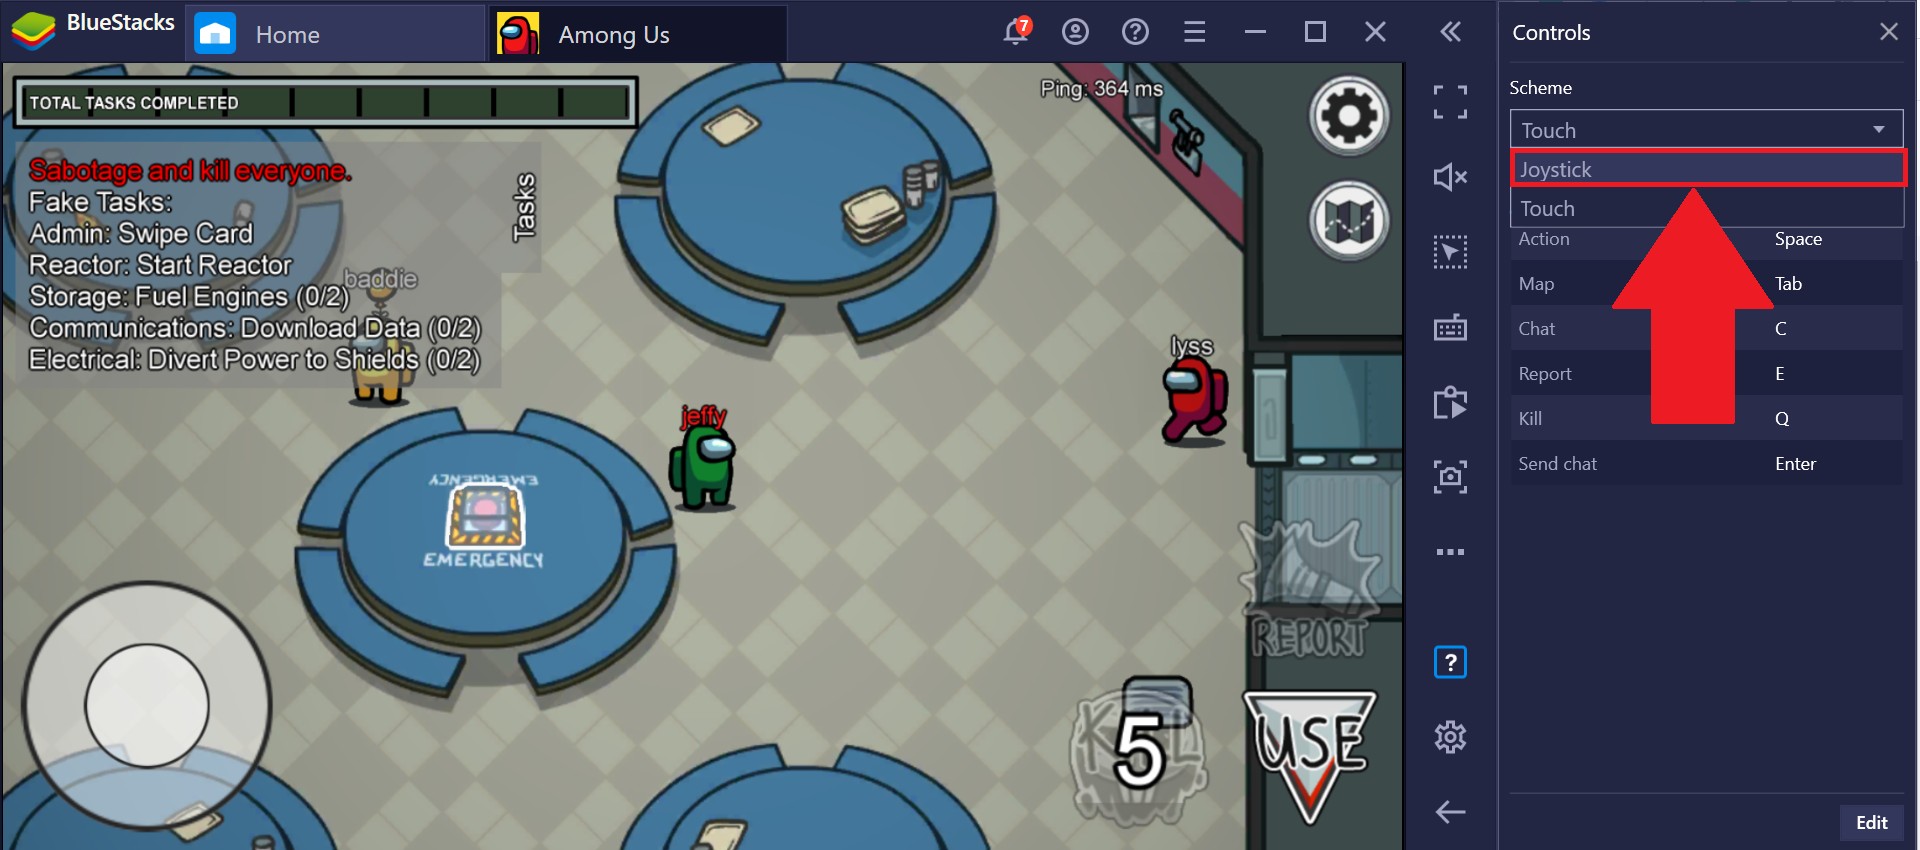 Among Us: how to download and play for free on mobile, PC, Mac - AS USA